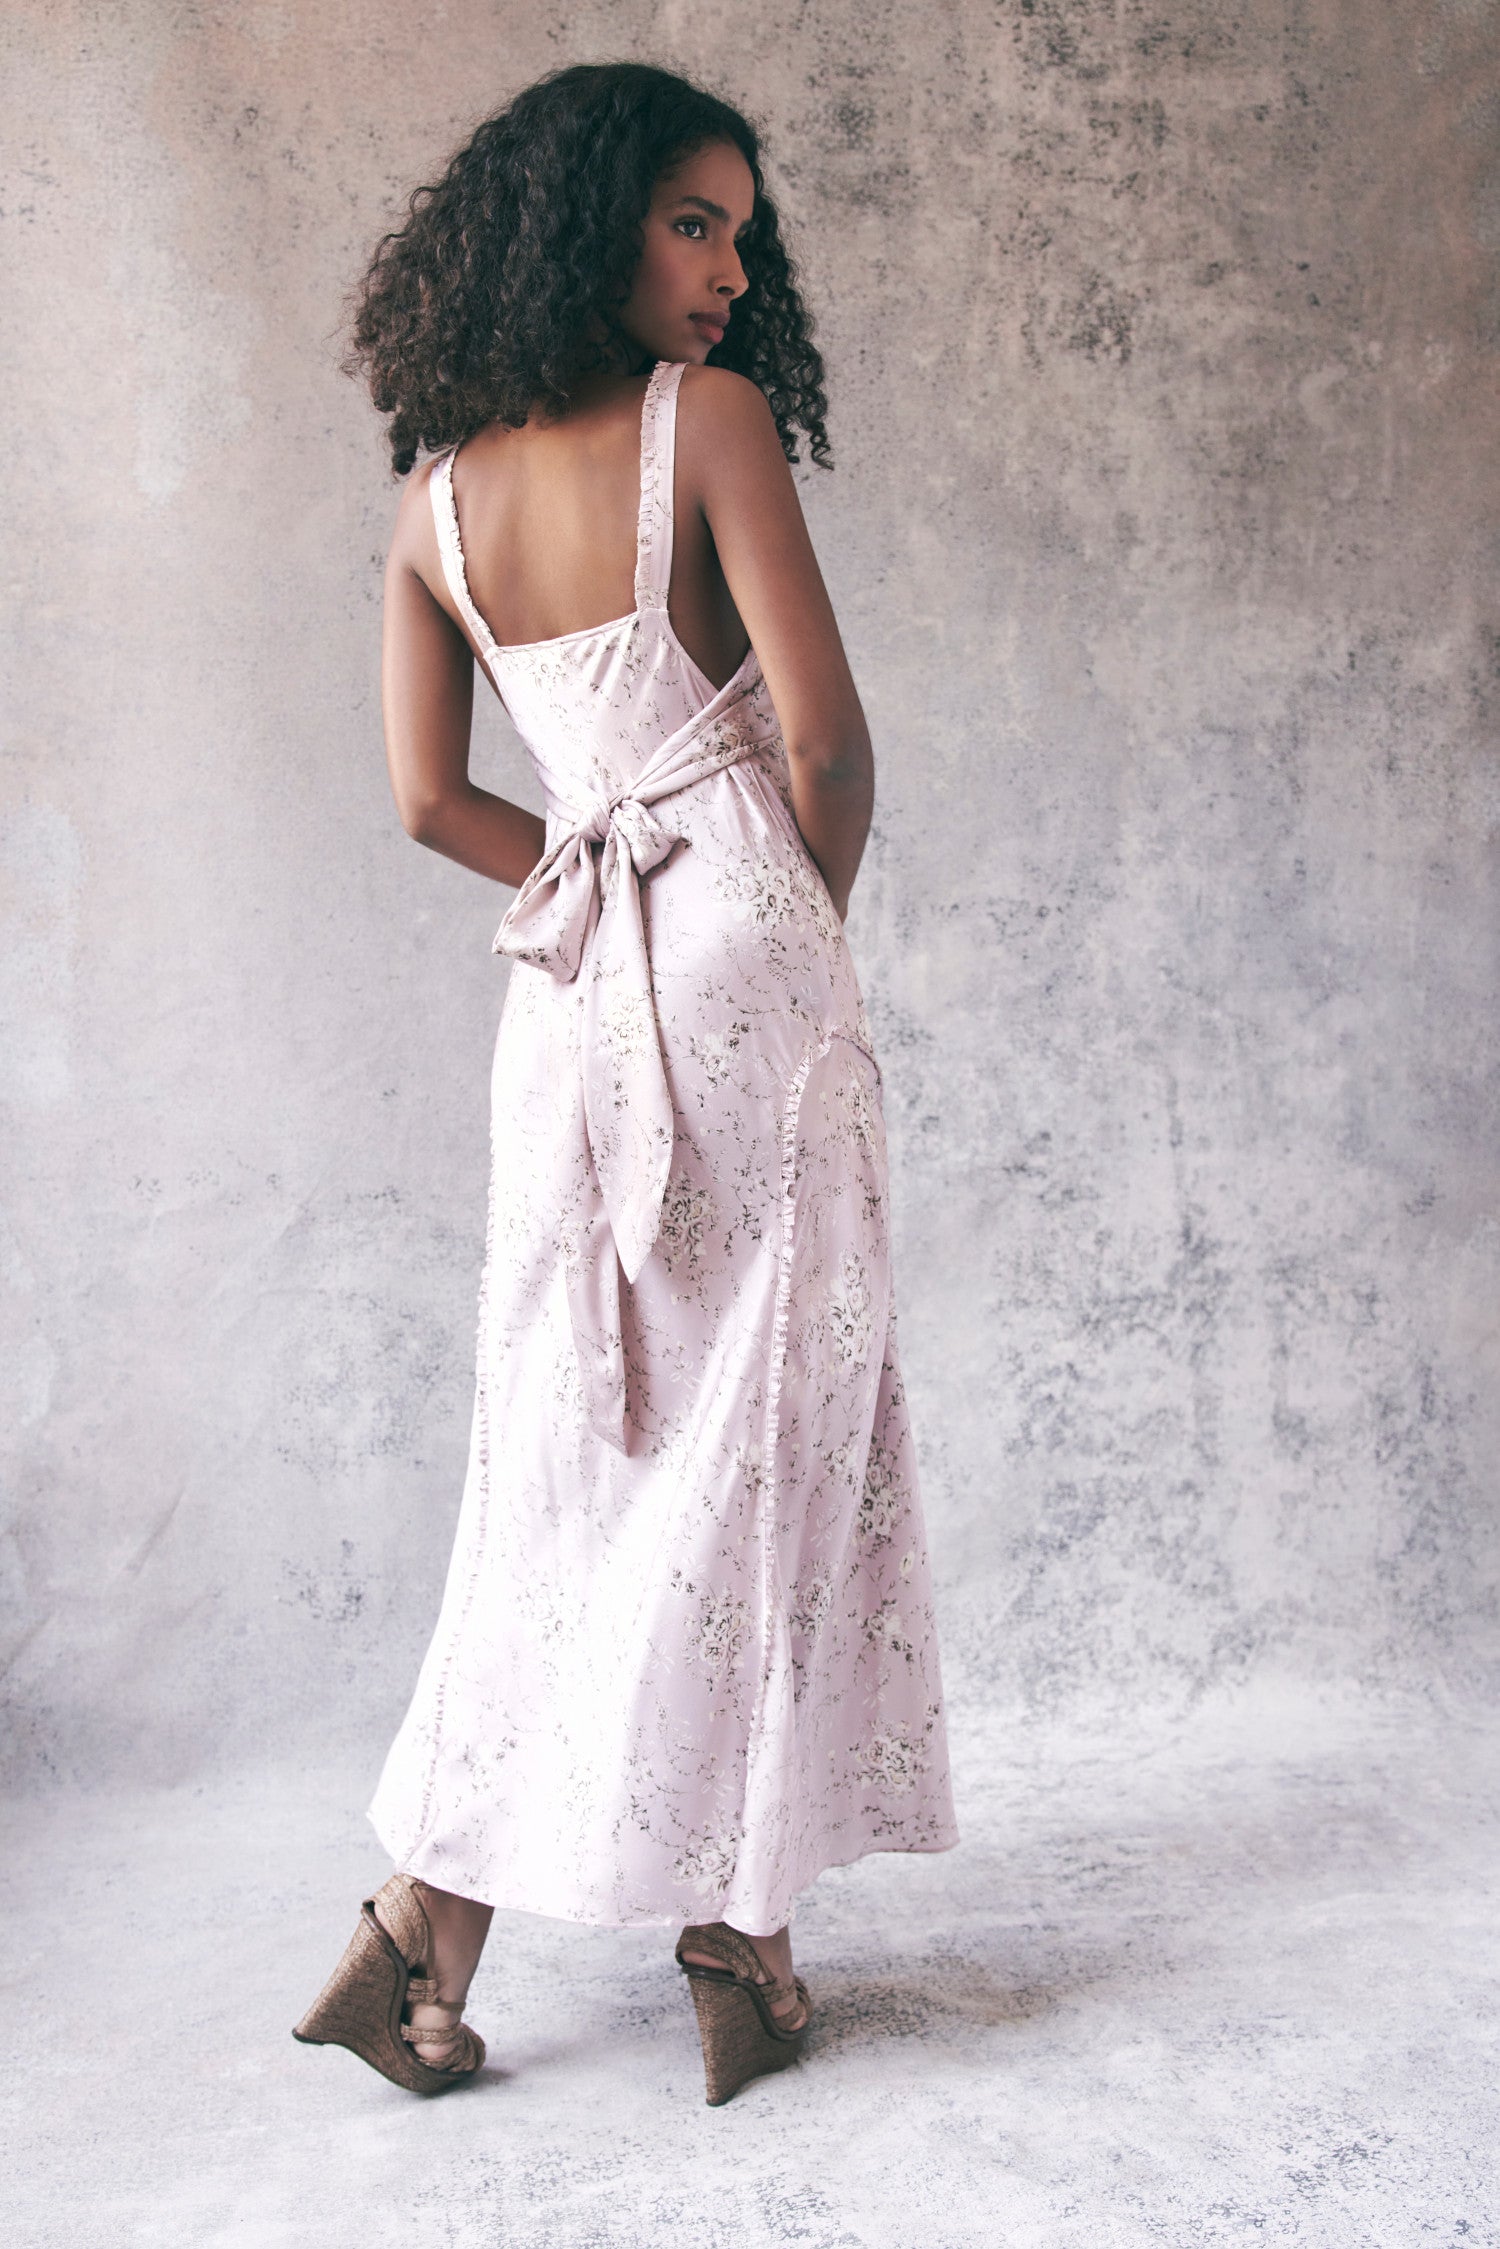 Back image of model wearing light pink floral maxi dress with ruffle trim detail. Dress ties in back with a bow